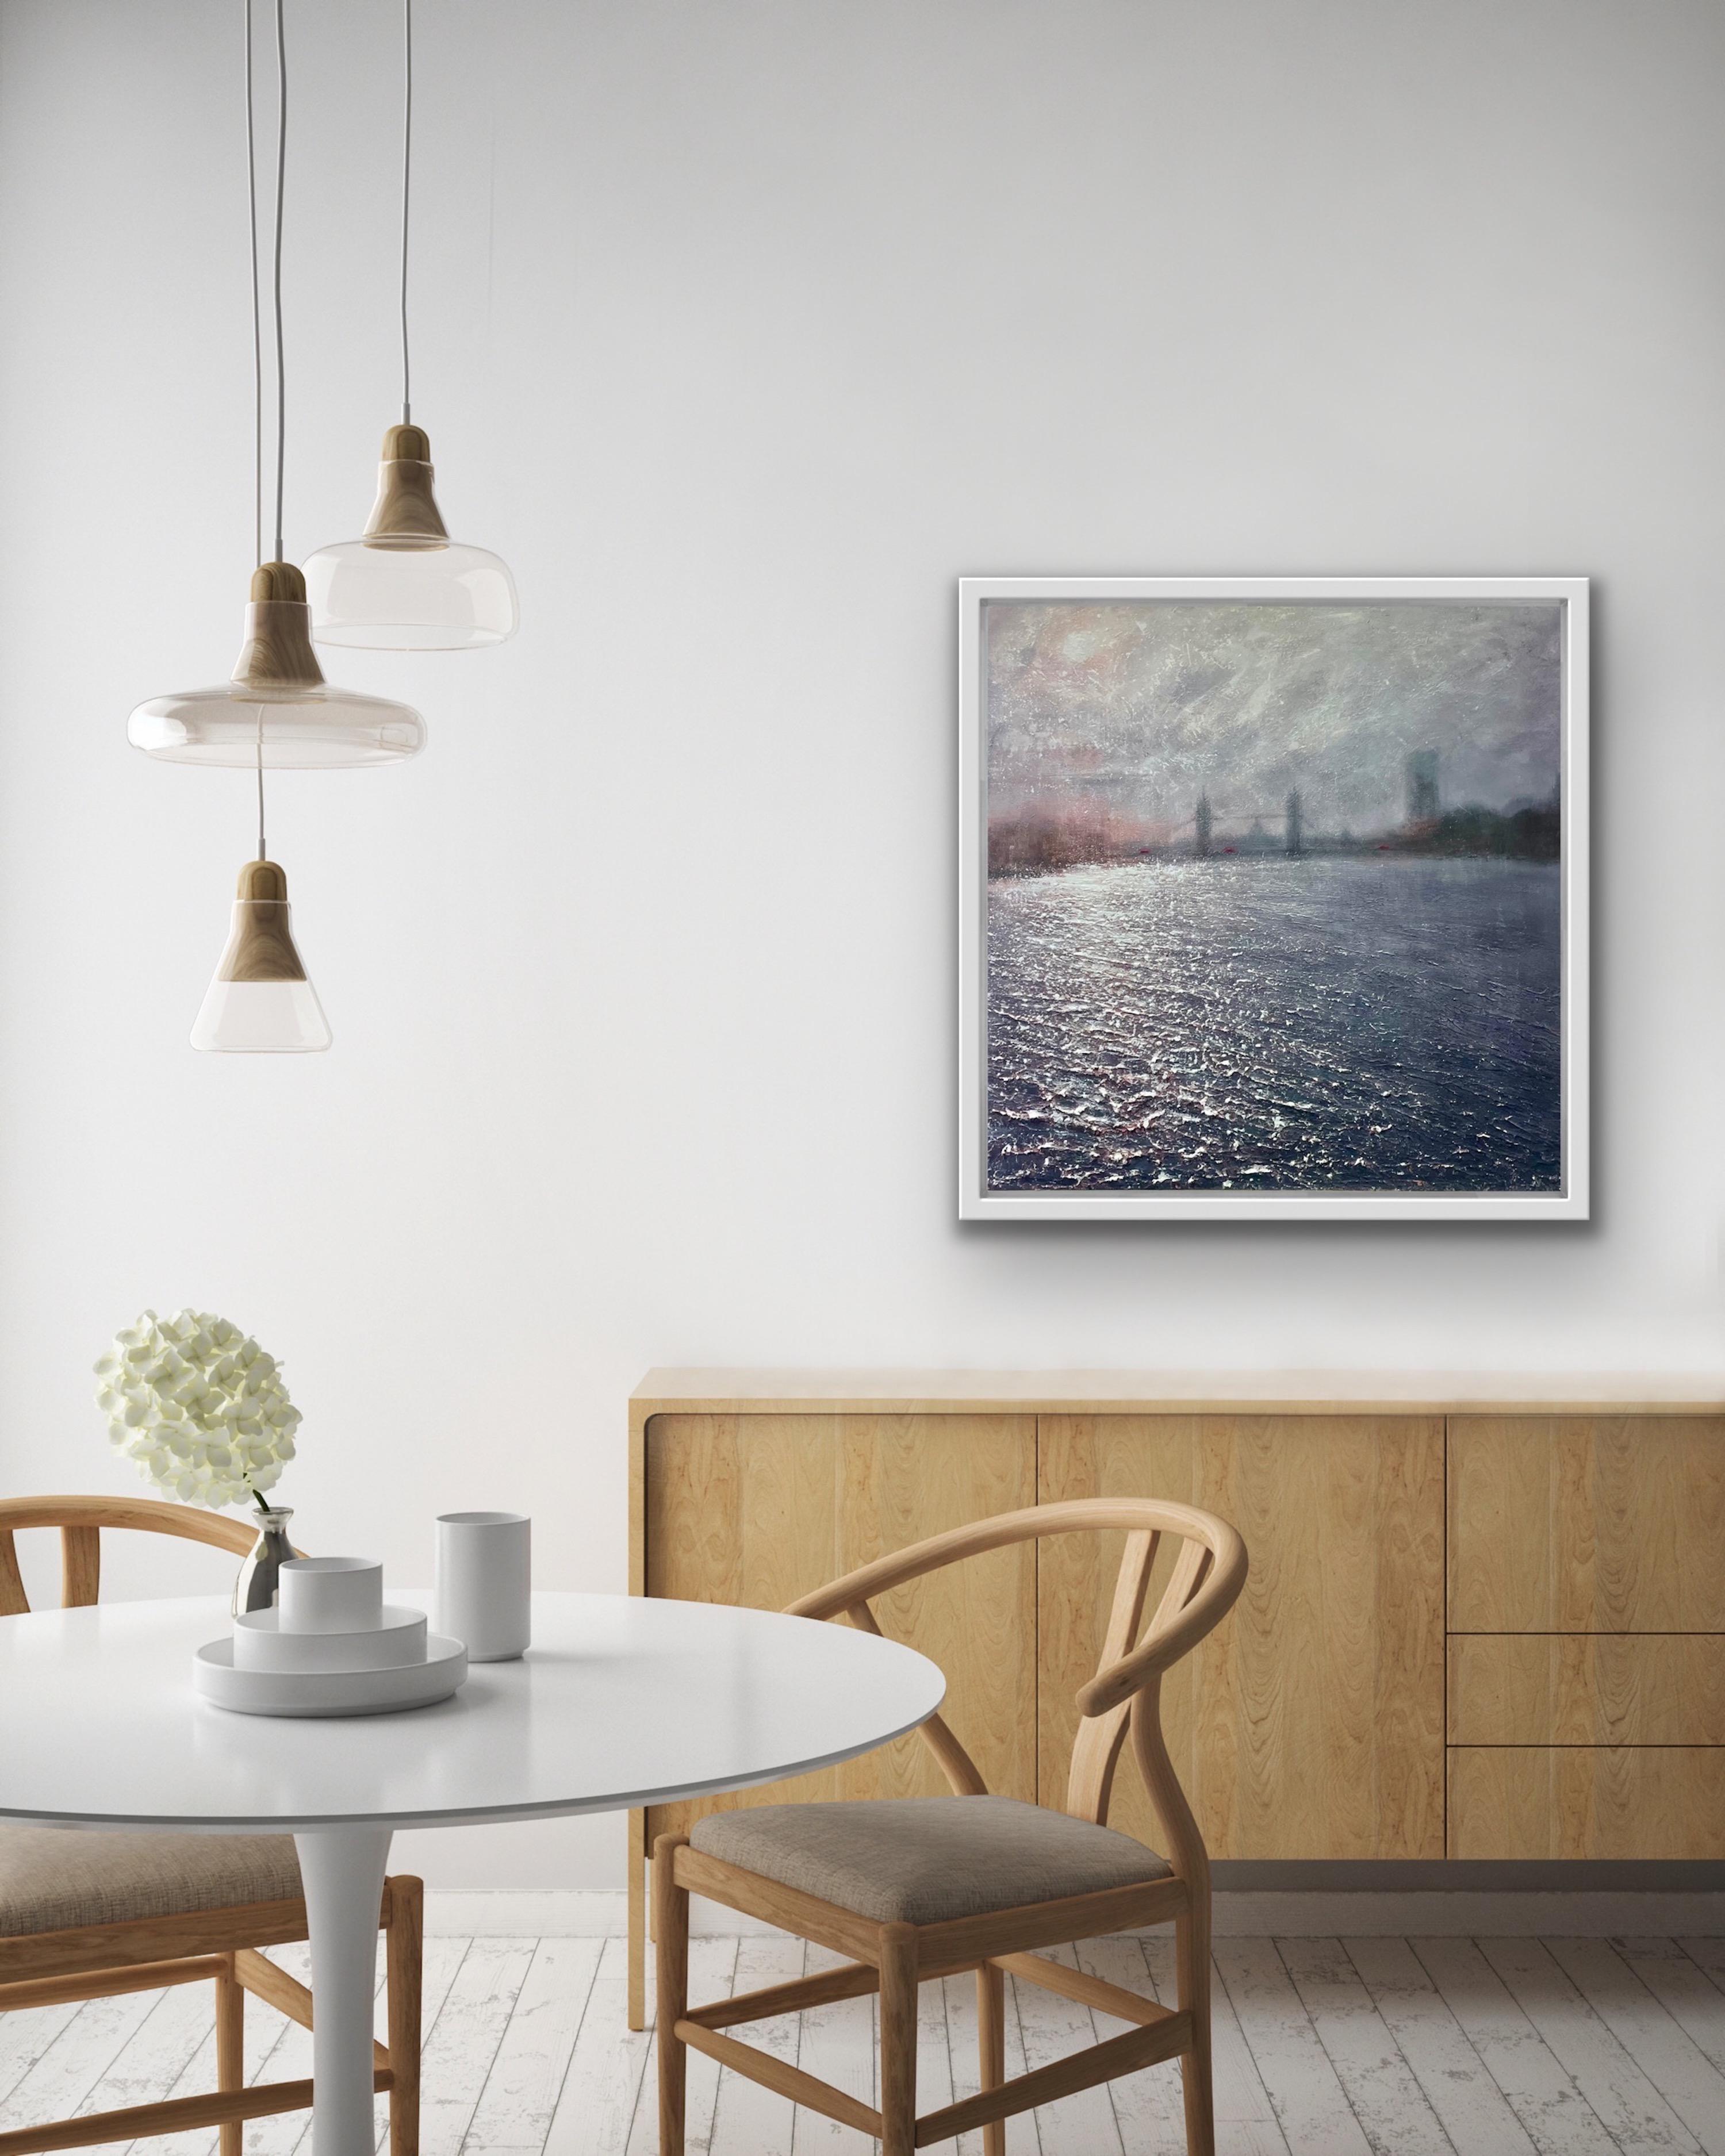 Tower Bridge Ripples [2022]
Signed by the artist
Oil paint over textured acrylic medium
Image size: H:76cm x W:76cm x D:2cm
Frame Size: H:85cm  x W:85cm x D:3cm
Please note that insitu images are purely an indication of how a piece may look
Tower